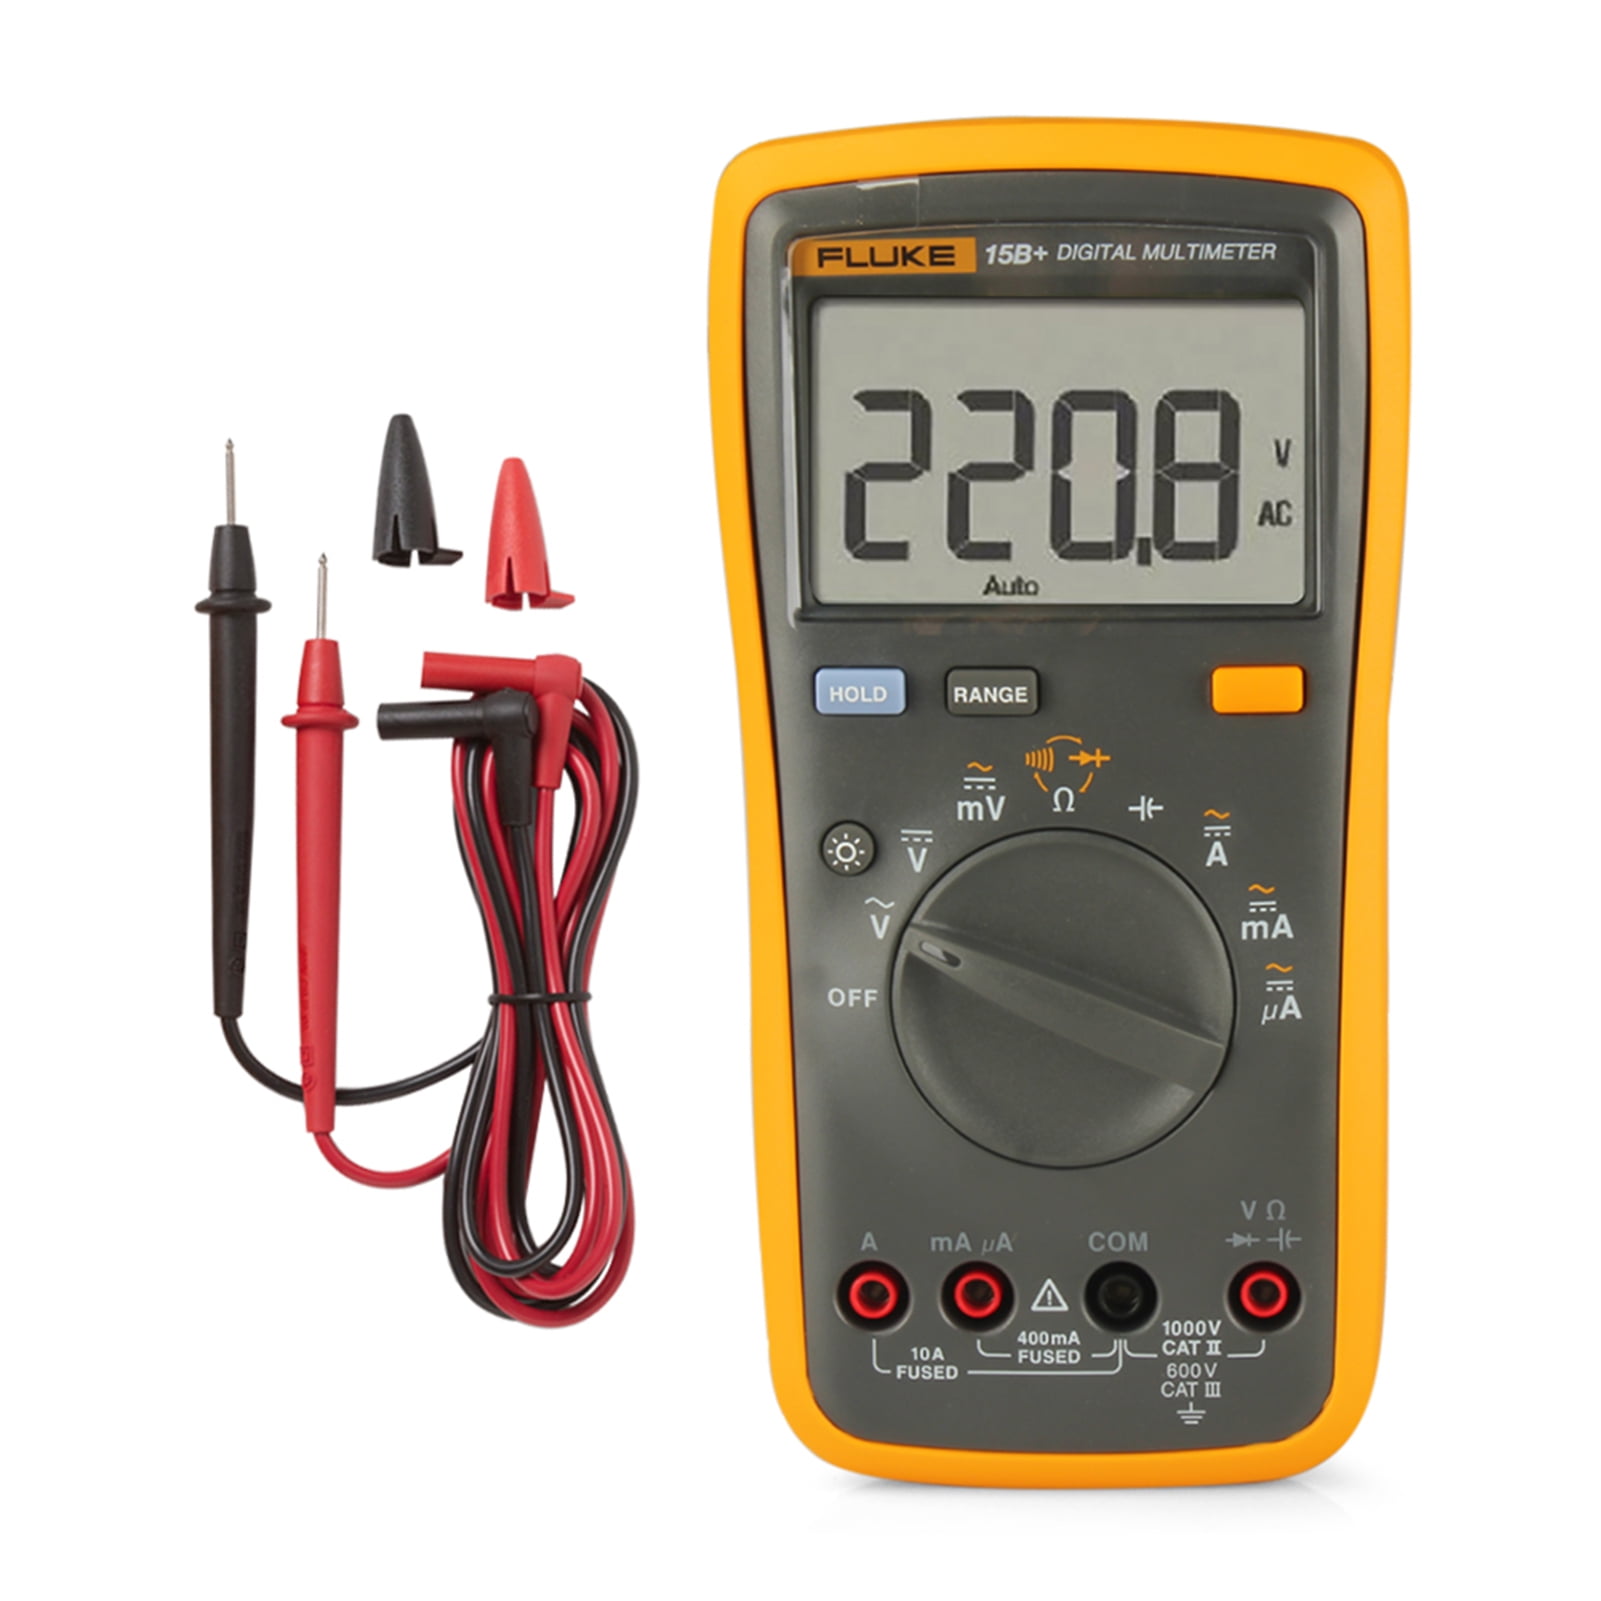 Universal USB High Quality Multimeter Portable Test Speed Voltage/Current Tester 